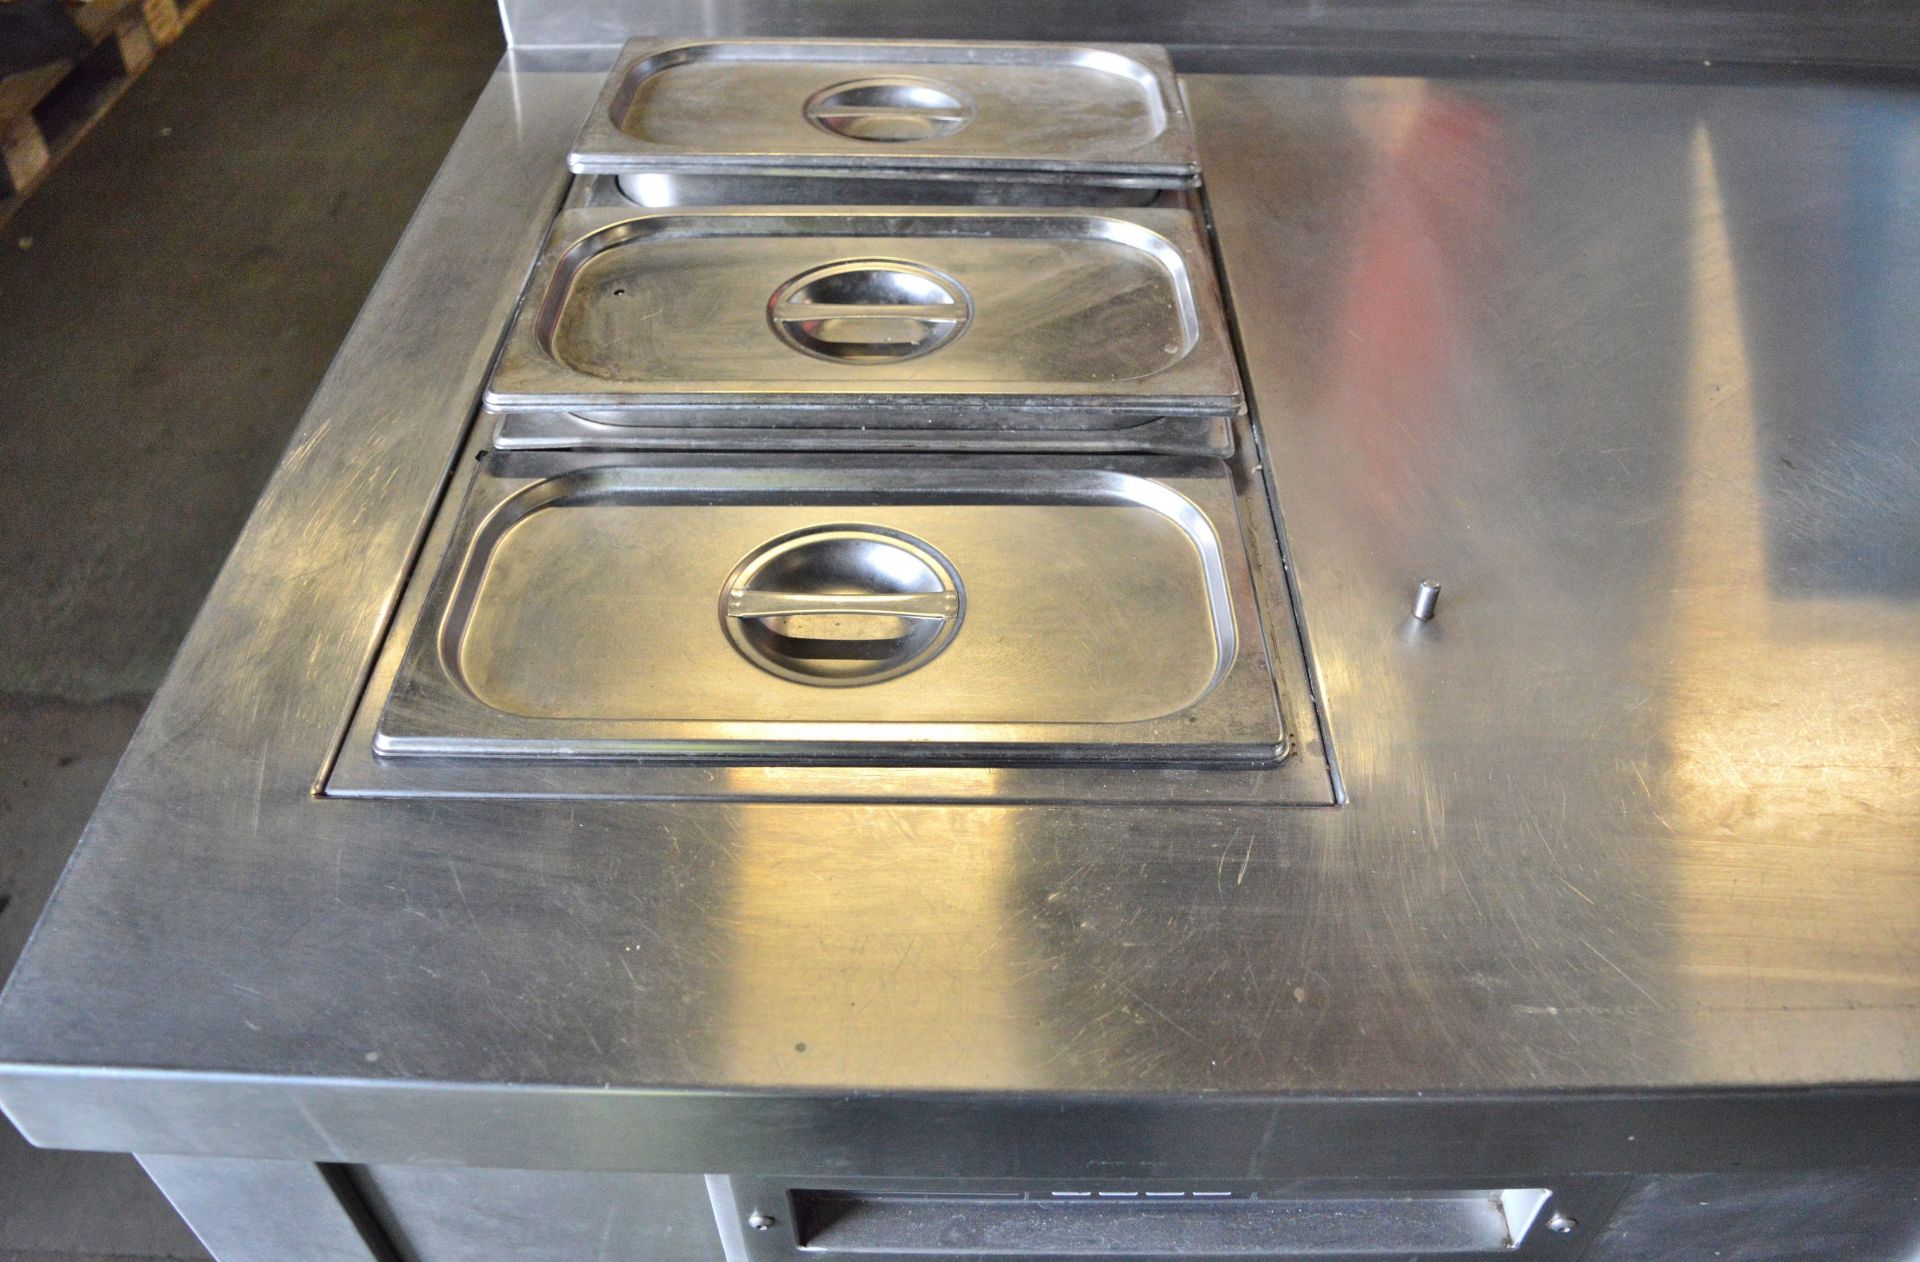 Nuttall Stainless Steel Heated Bain Marie Unit - L1500 x D750 x H960mm - Image 4 of 7